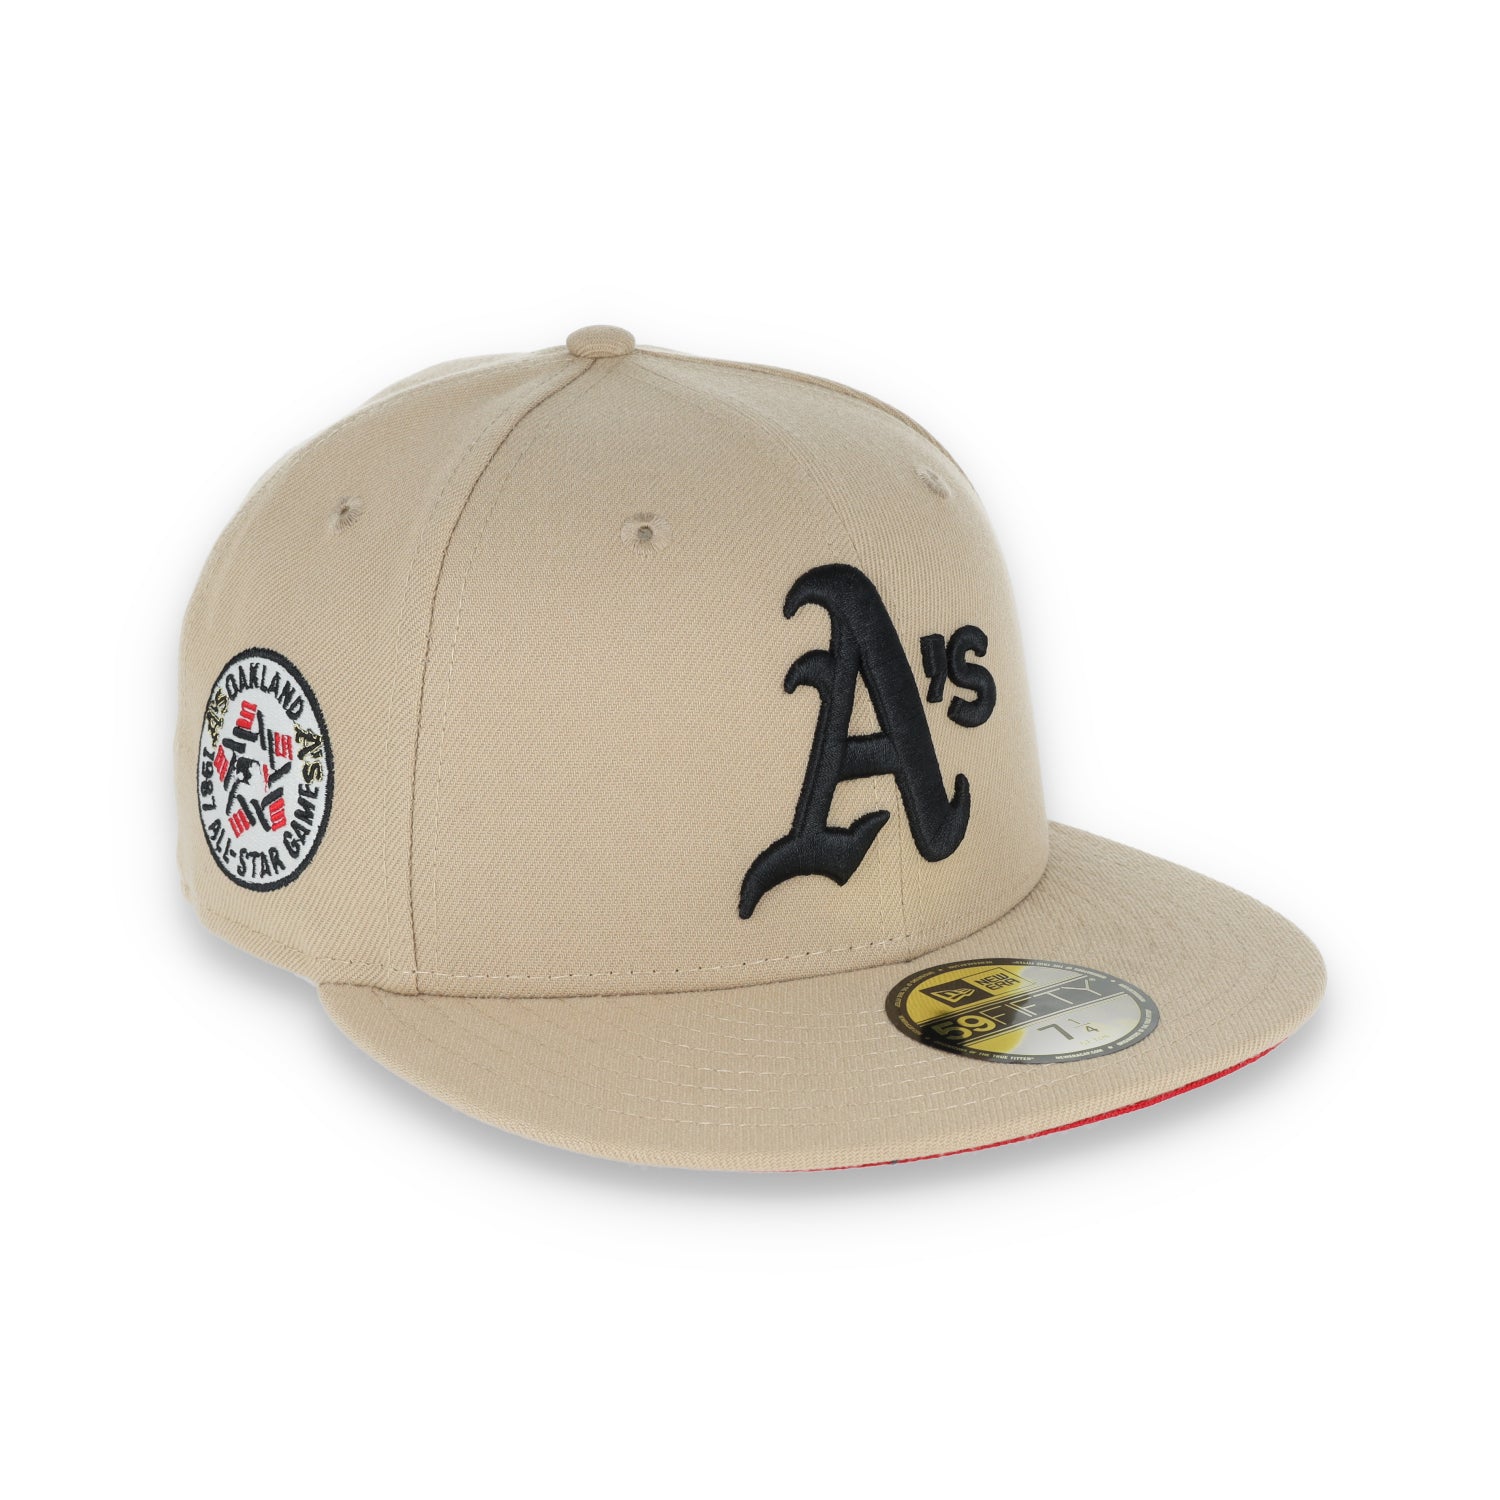 New Era Oakland Athletics 1987 All Star Patch 59FIFTY Fitted-Tan/Black